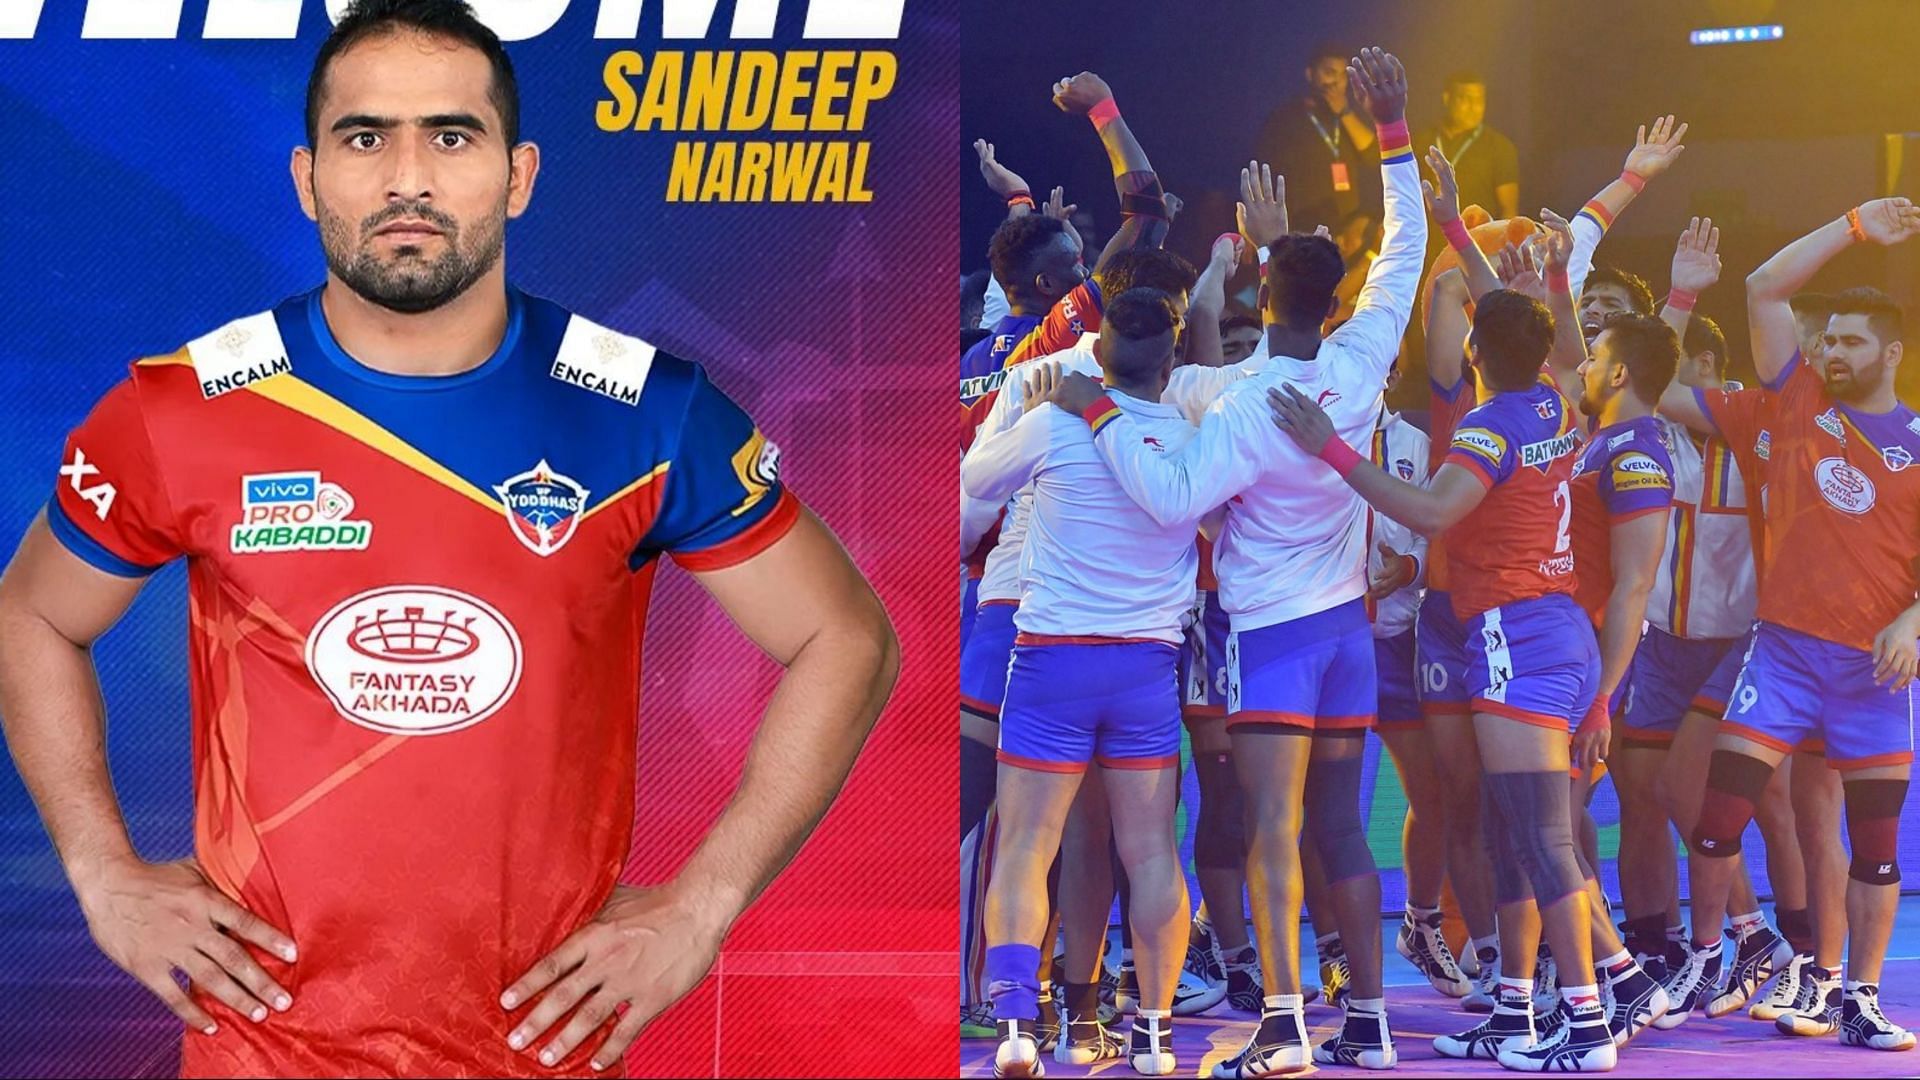 Sandeep Narwal will don the UP Yoddhas jersey in Pro Kabaddi 2022 (Image: Instagram)